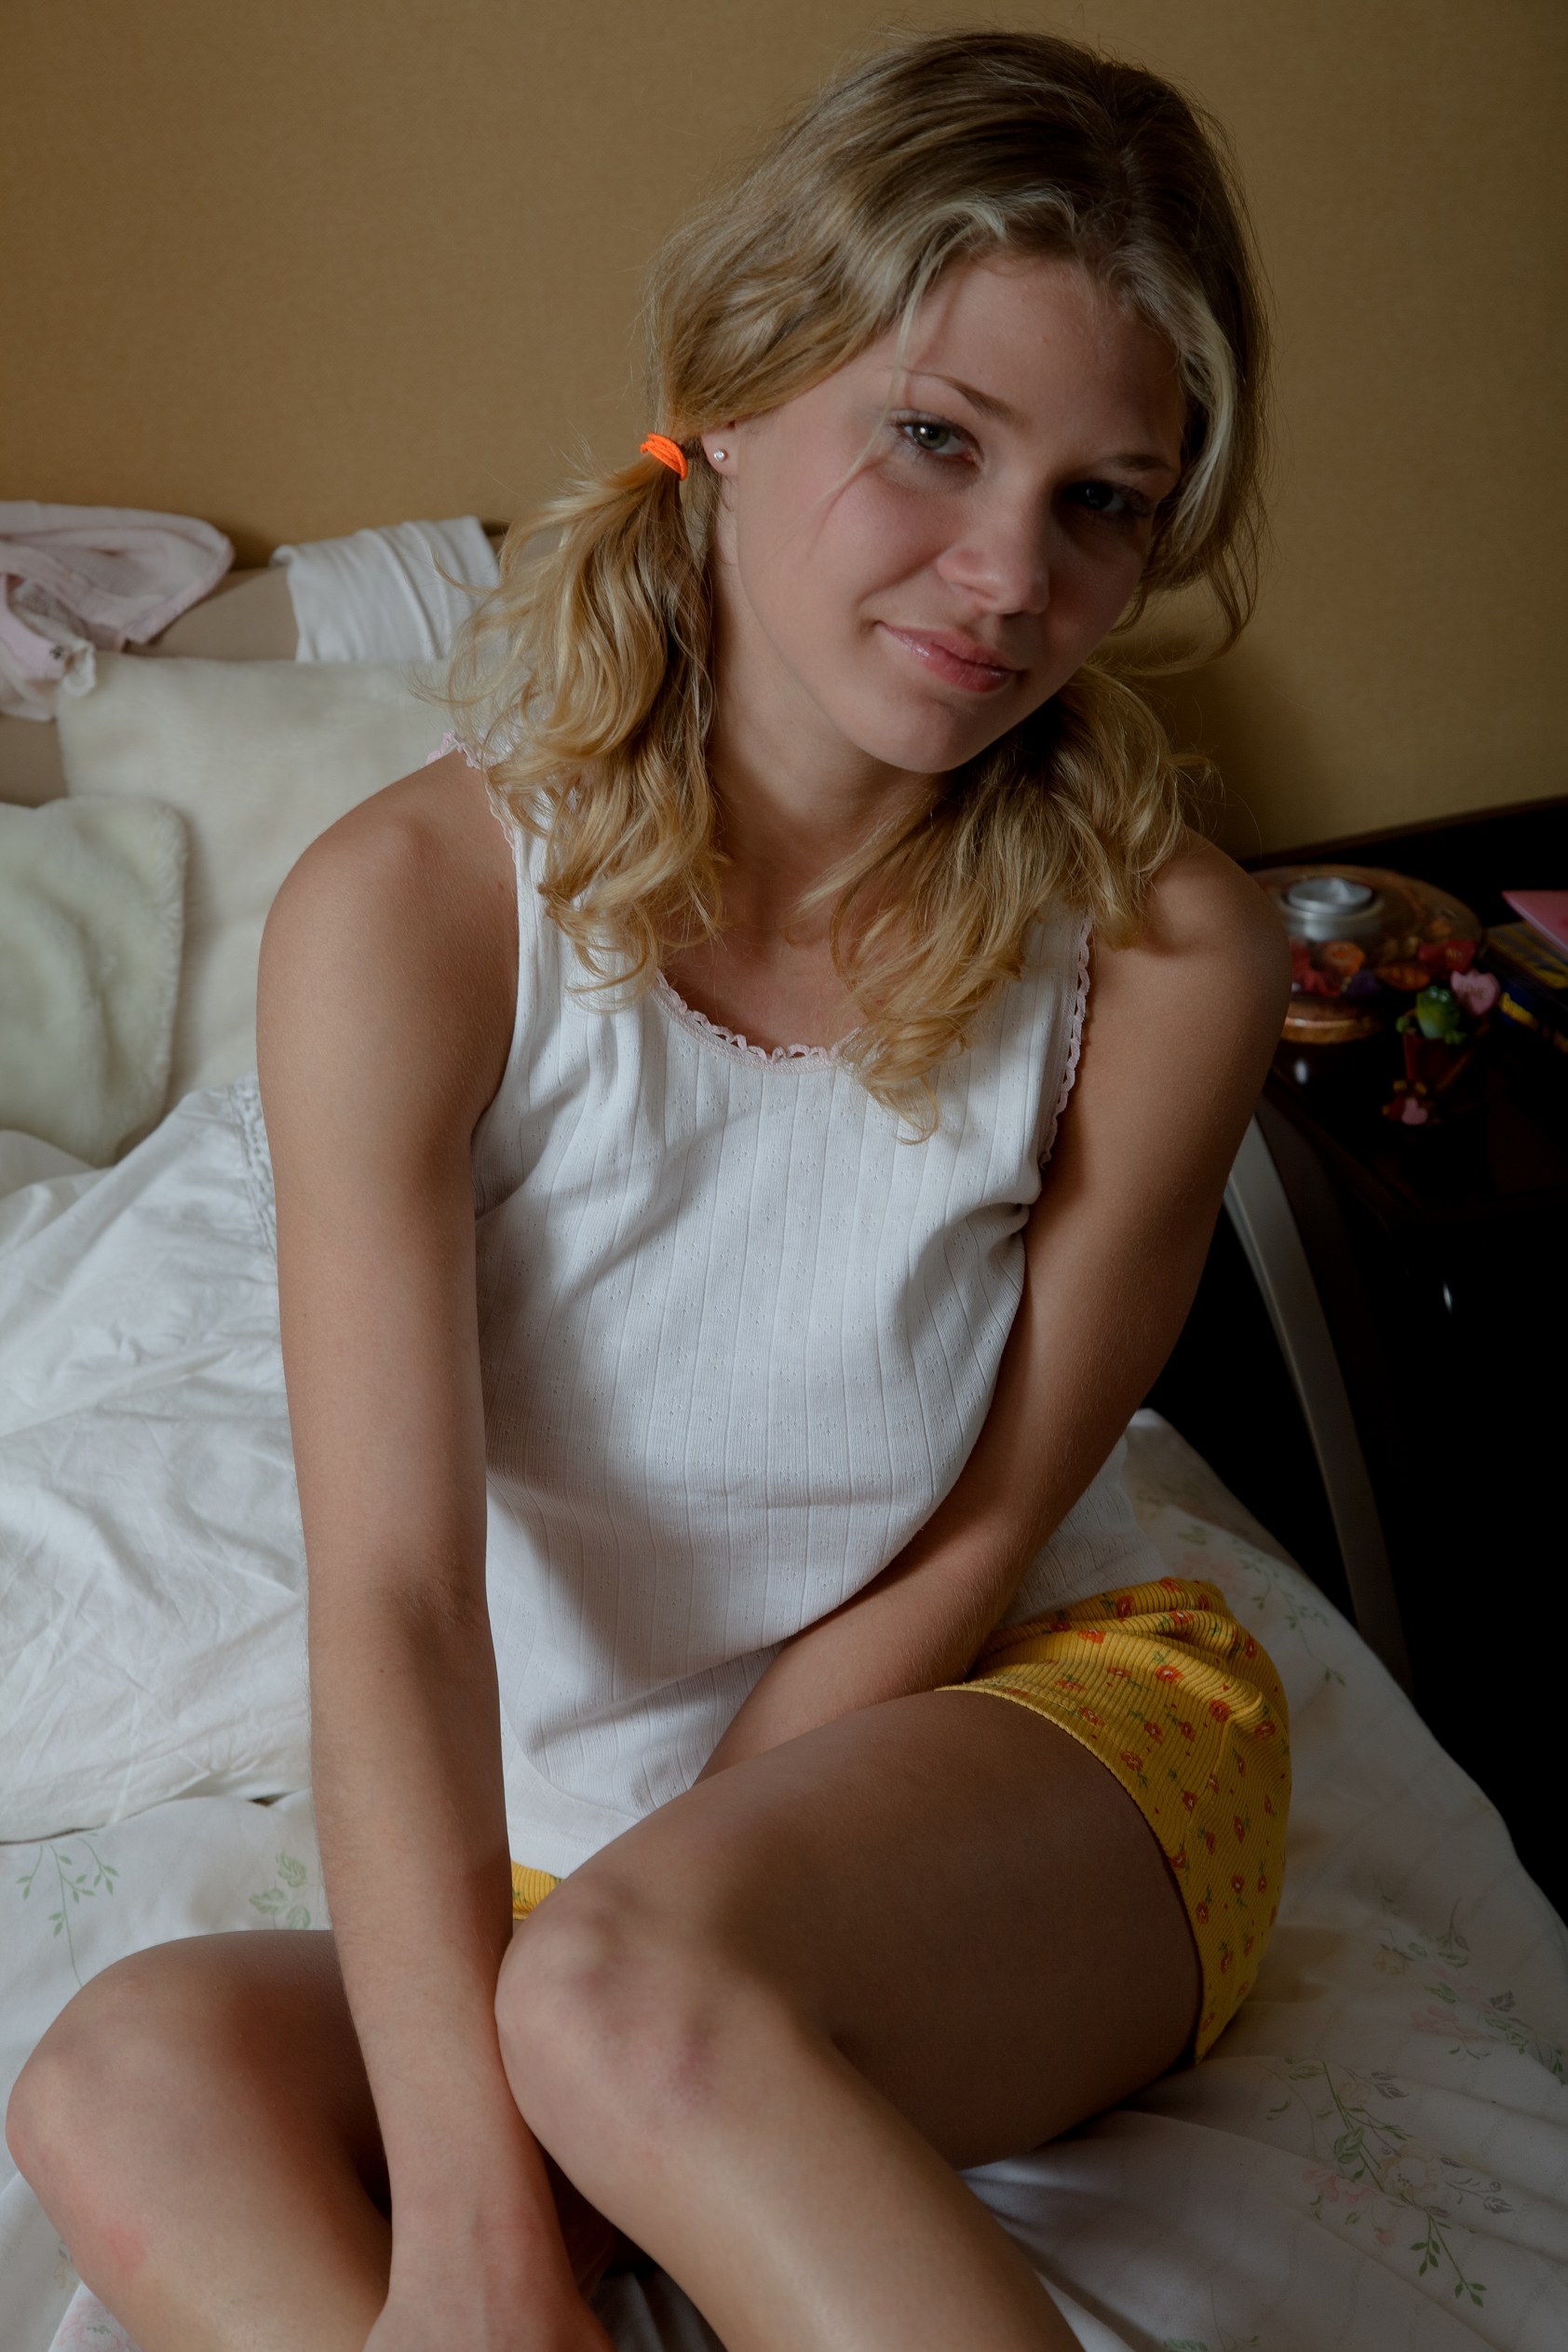 cute-blonde-teen-spreading-her-sweet-shaved-pussy-on-the-bed-4